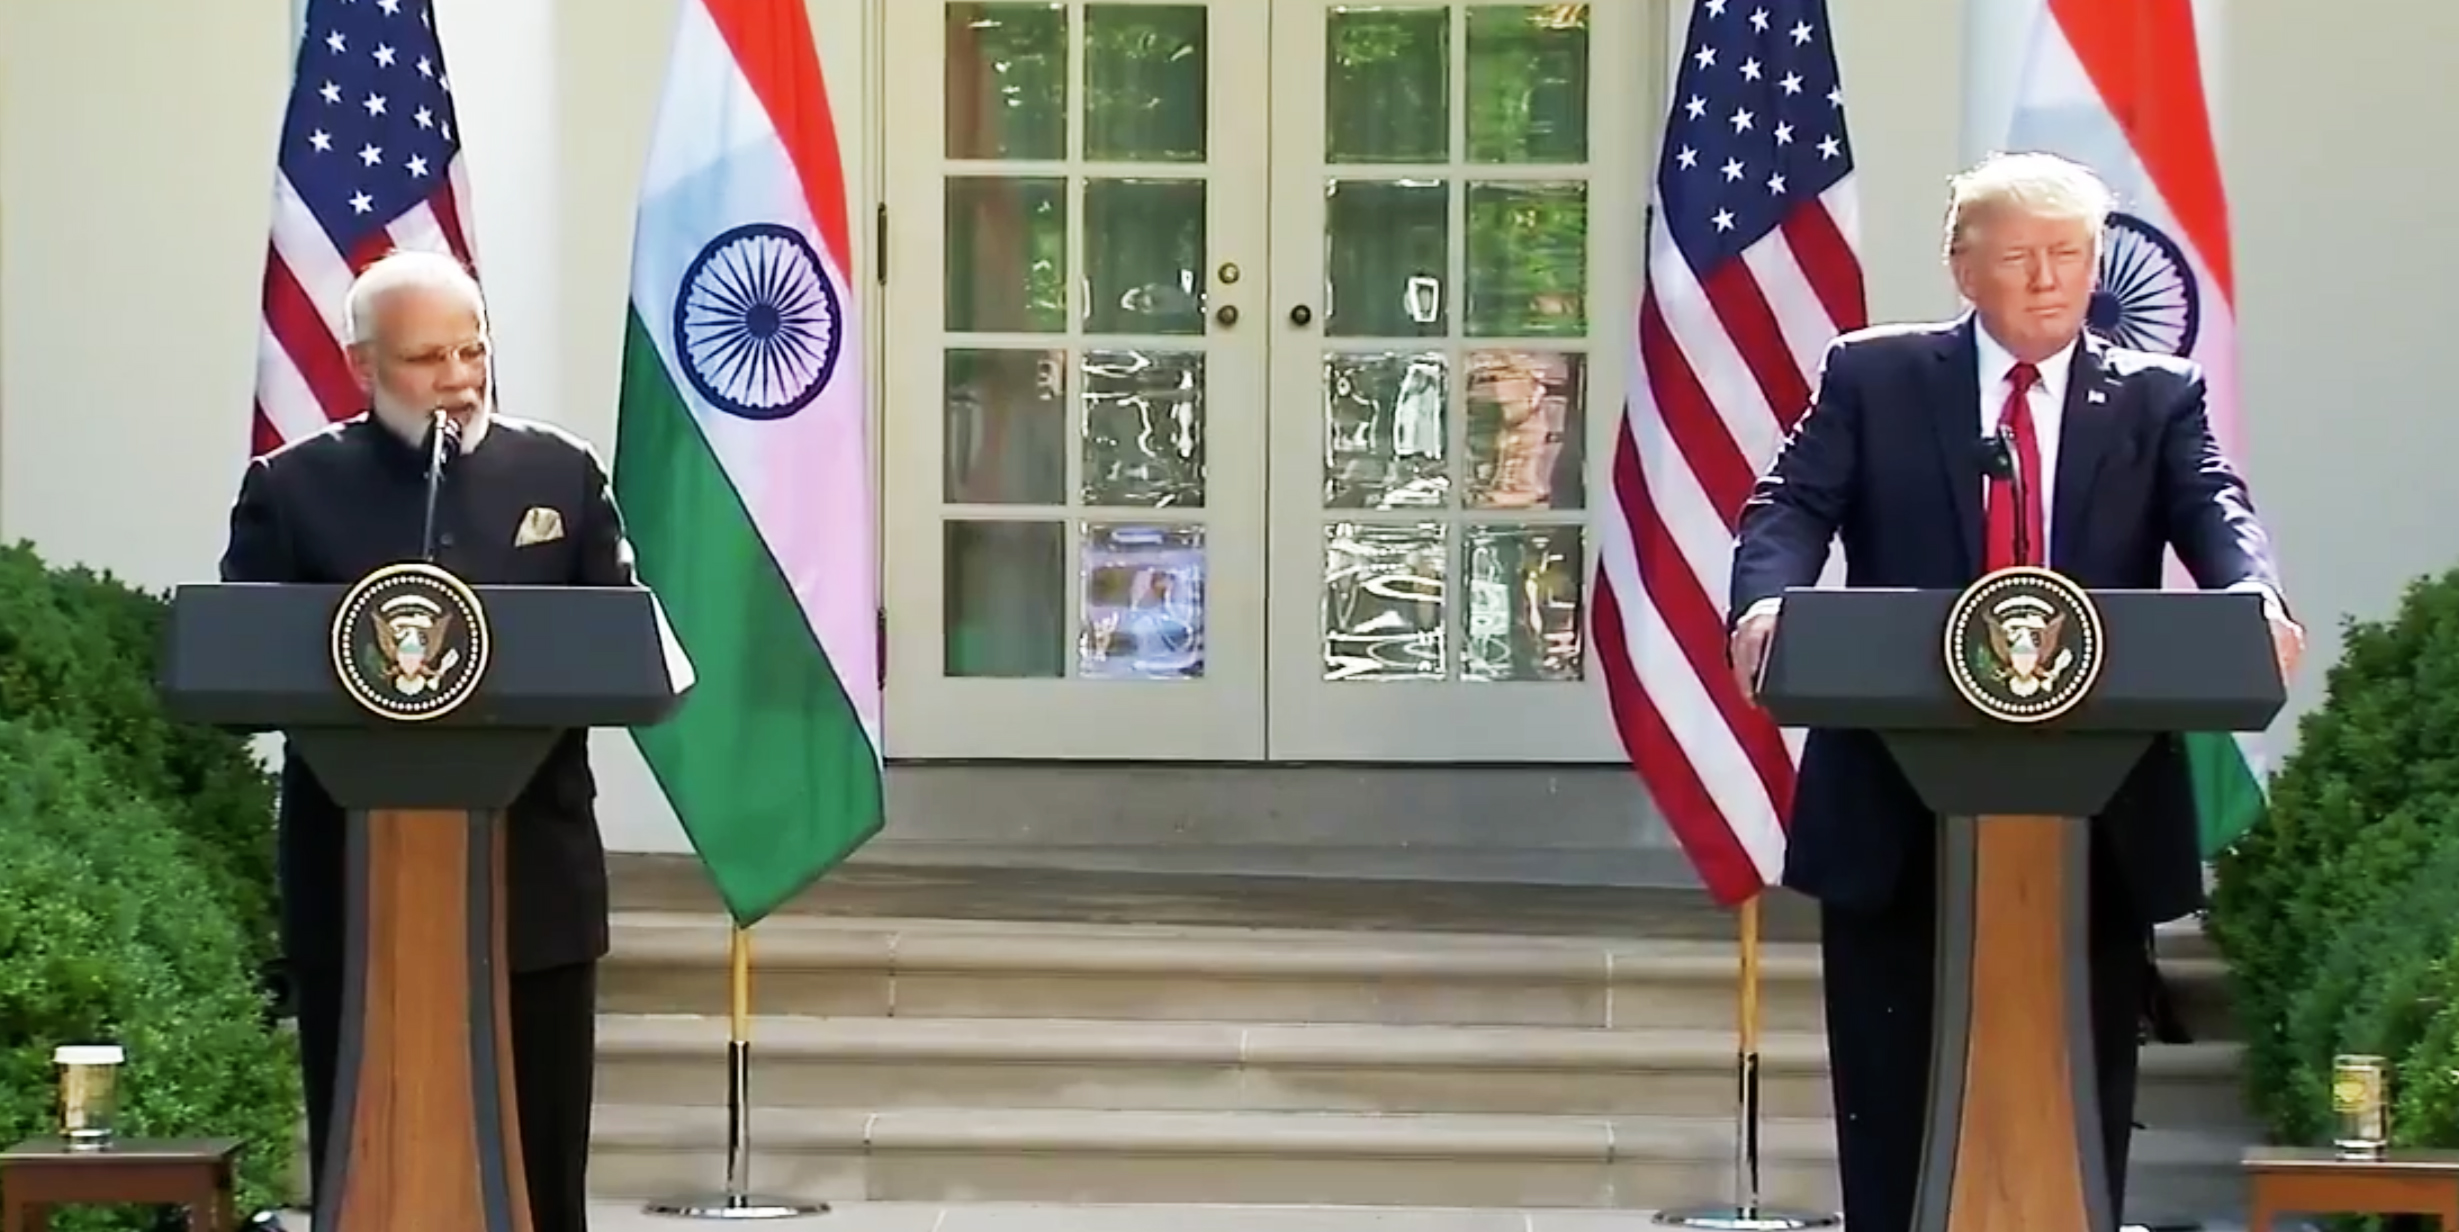 America is the ‘primary partner’ for India’s transformation, says PM Modi in Washington